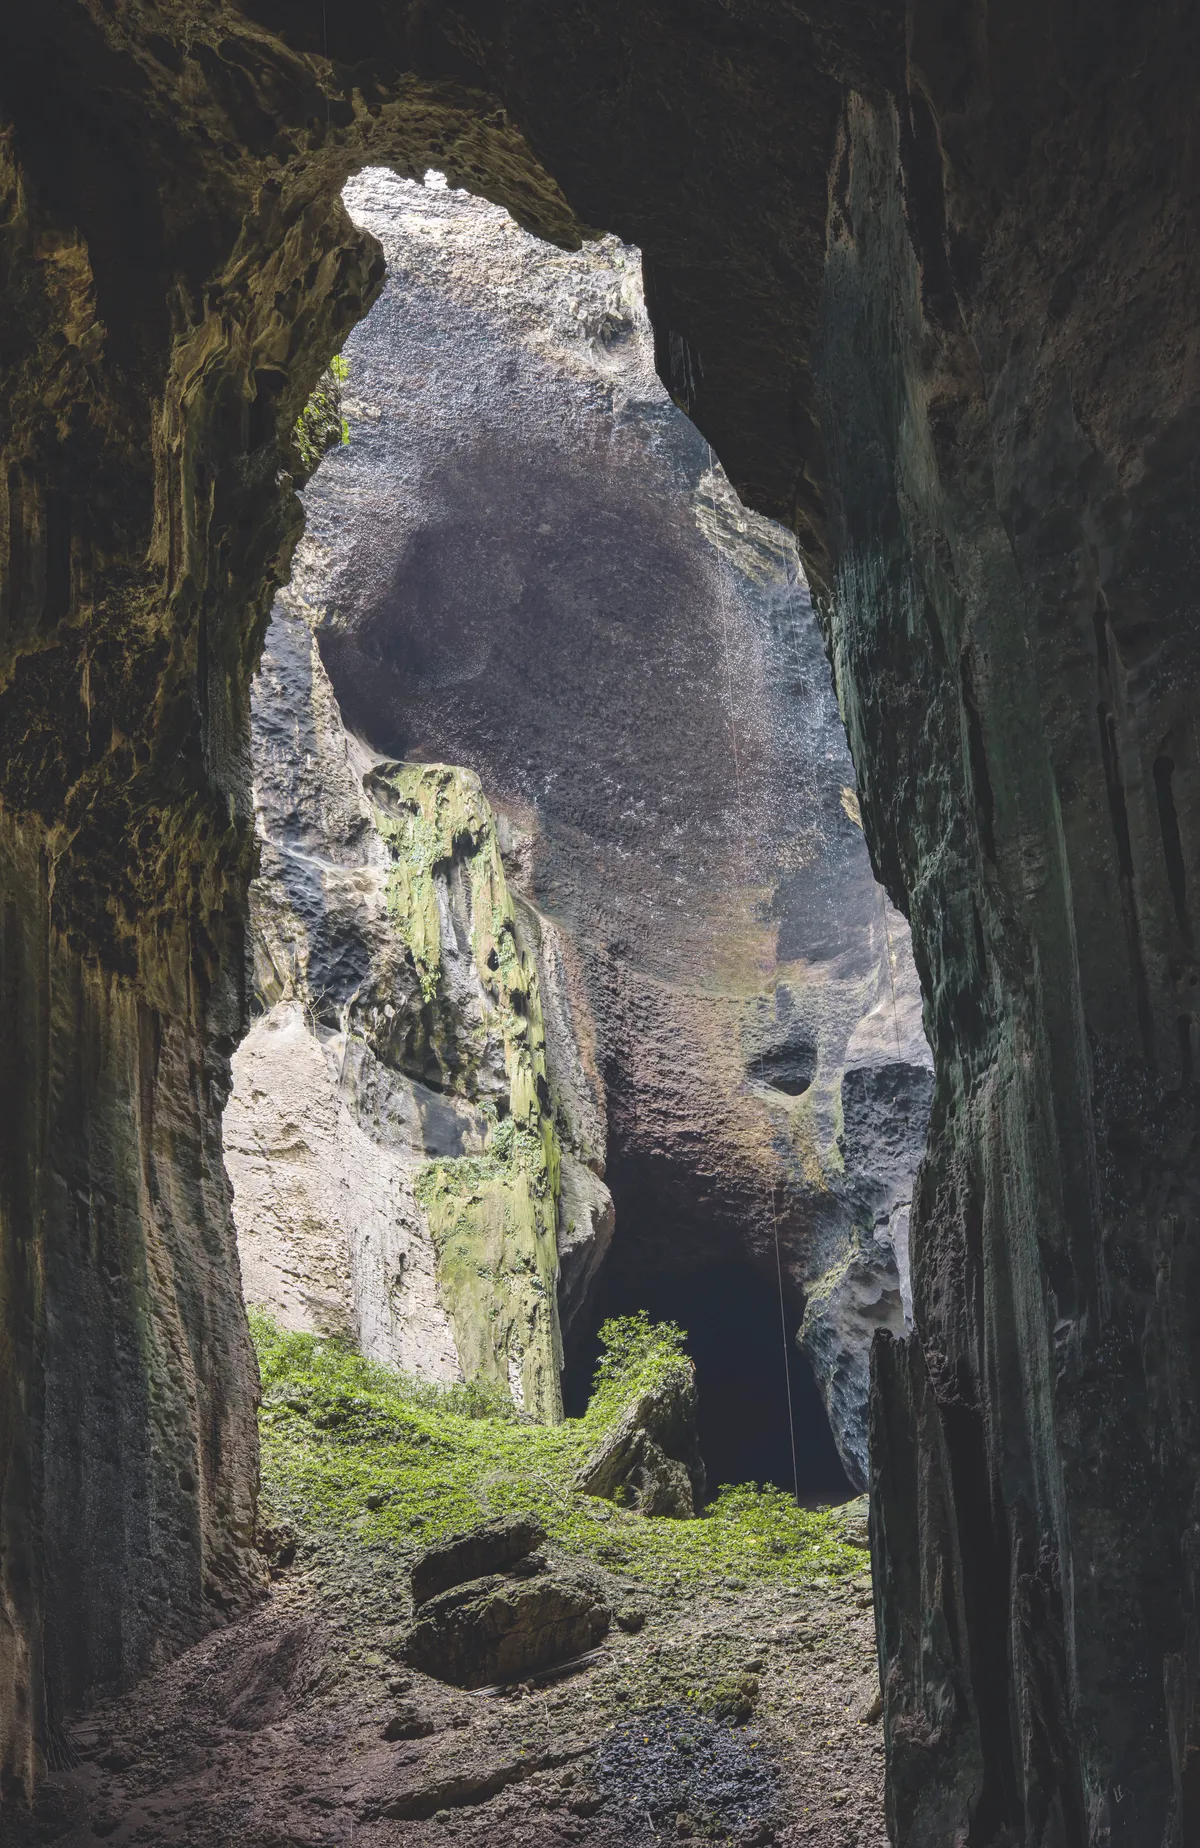 One of the main entrances to the Gomantong Cave system. Twice a year local people follow a tradition from the middle ages and pass through here to collect empty swiftlet nests, which are used to make bird’s nest soup – though the activity is now licensed. © Emanuele Biggi and Francesco Tomasinelli.